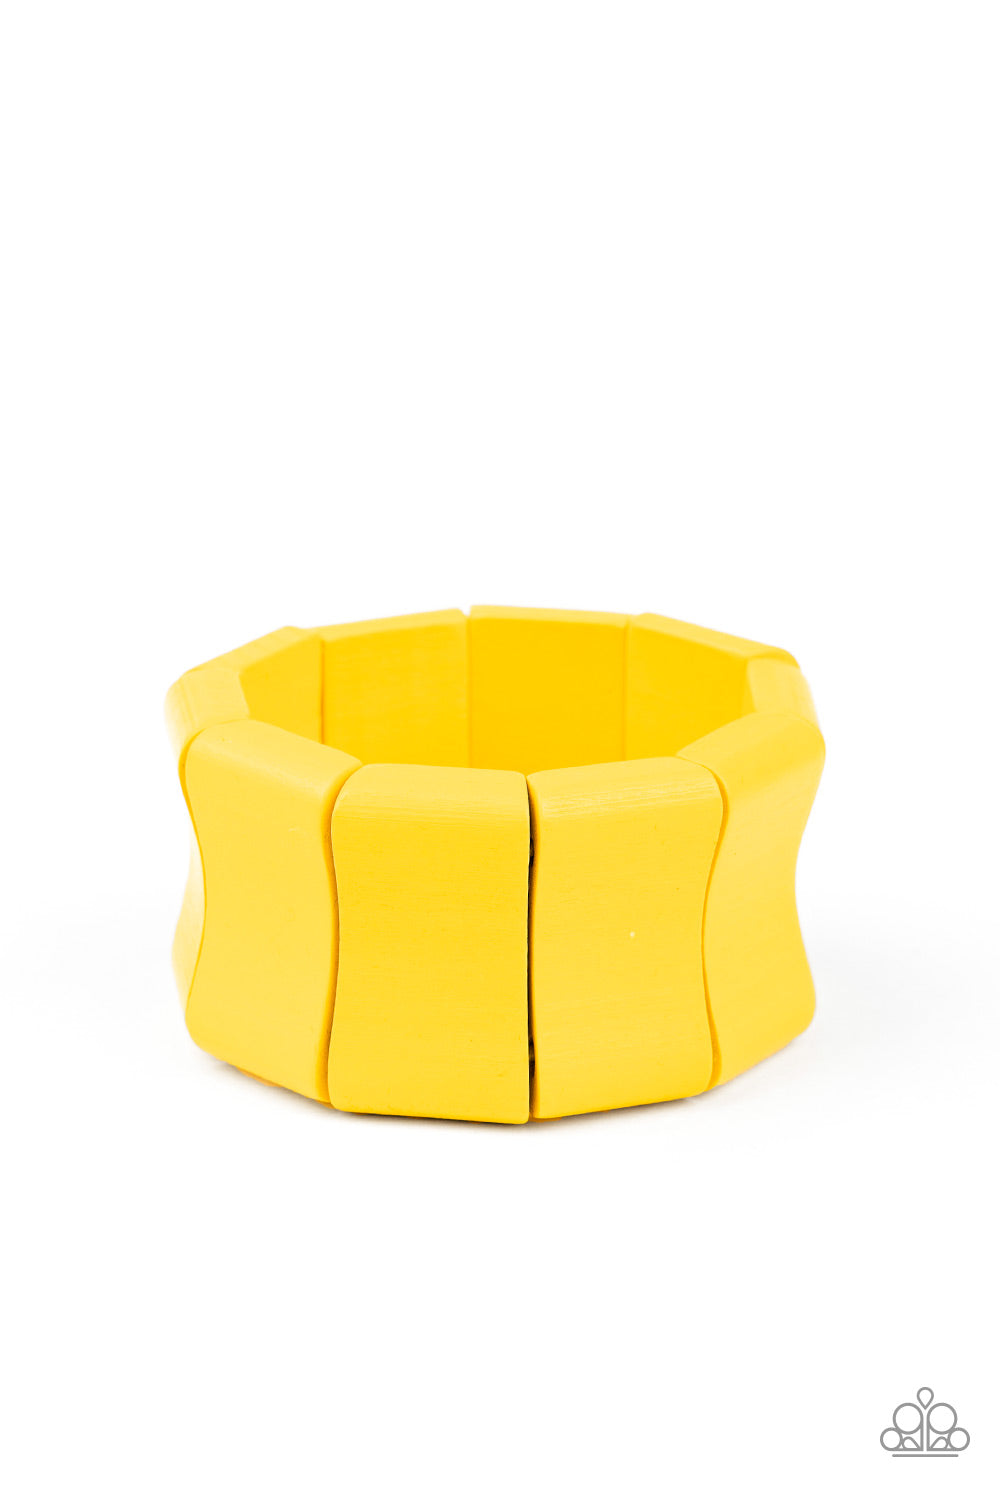 Paparazzi Caribbean Couture - Yellow Wooden Bracelet - A Finishing Touch 